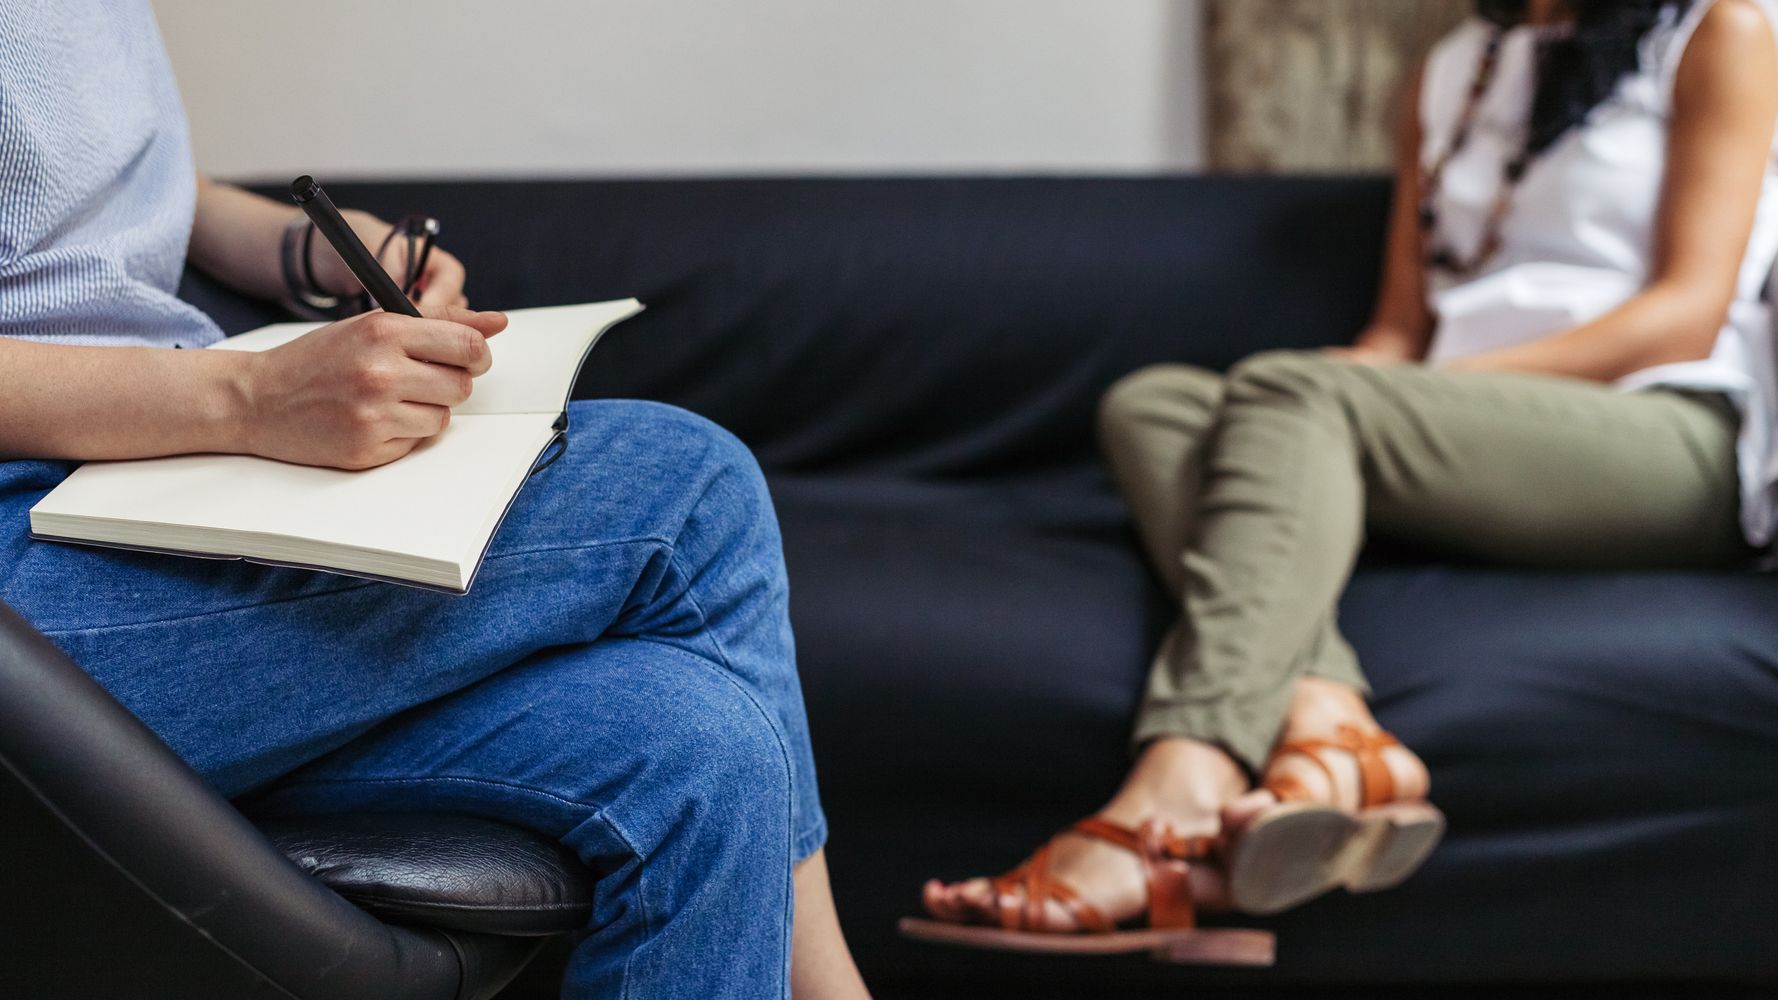 The 6 Relationship Problems Millennials Bring Up The Most In Therapy